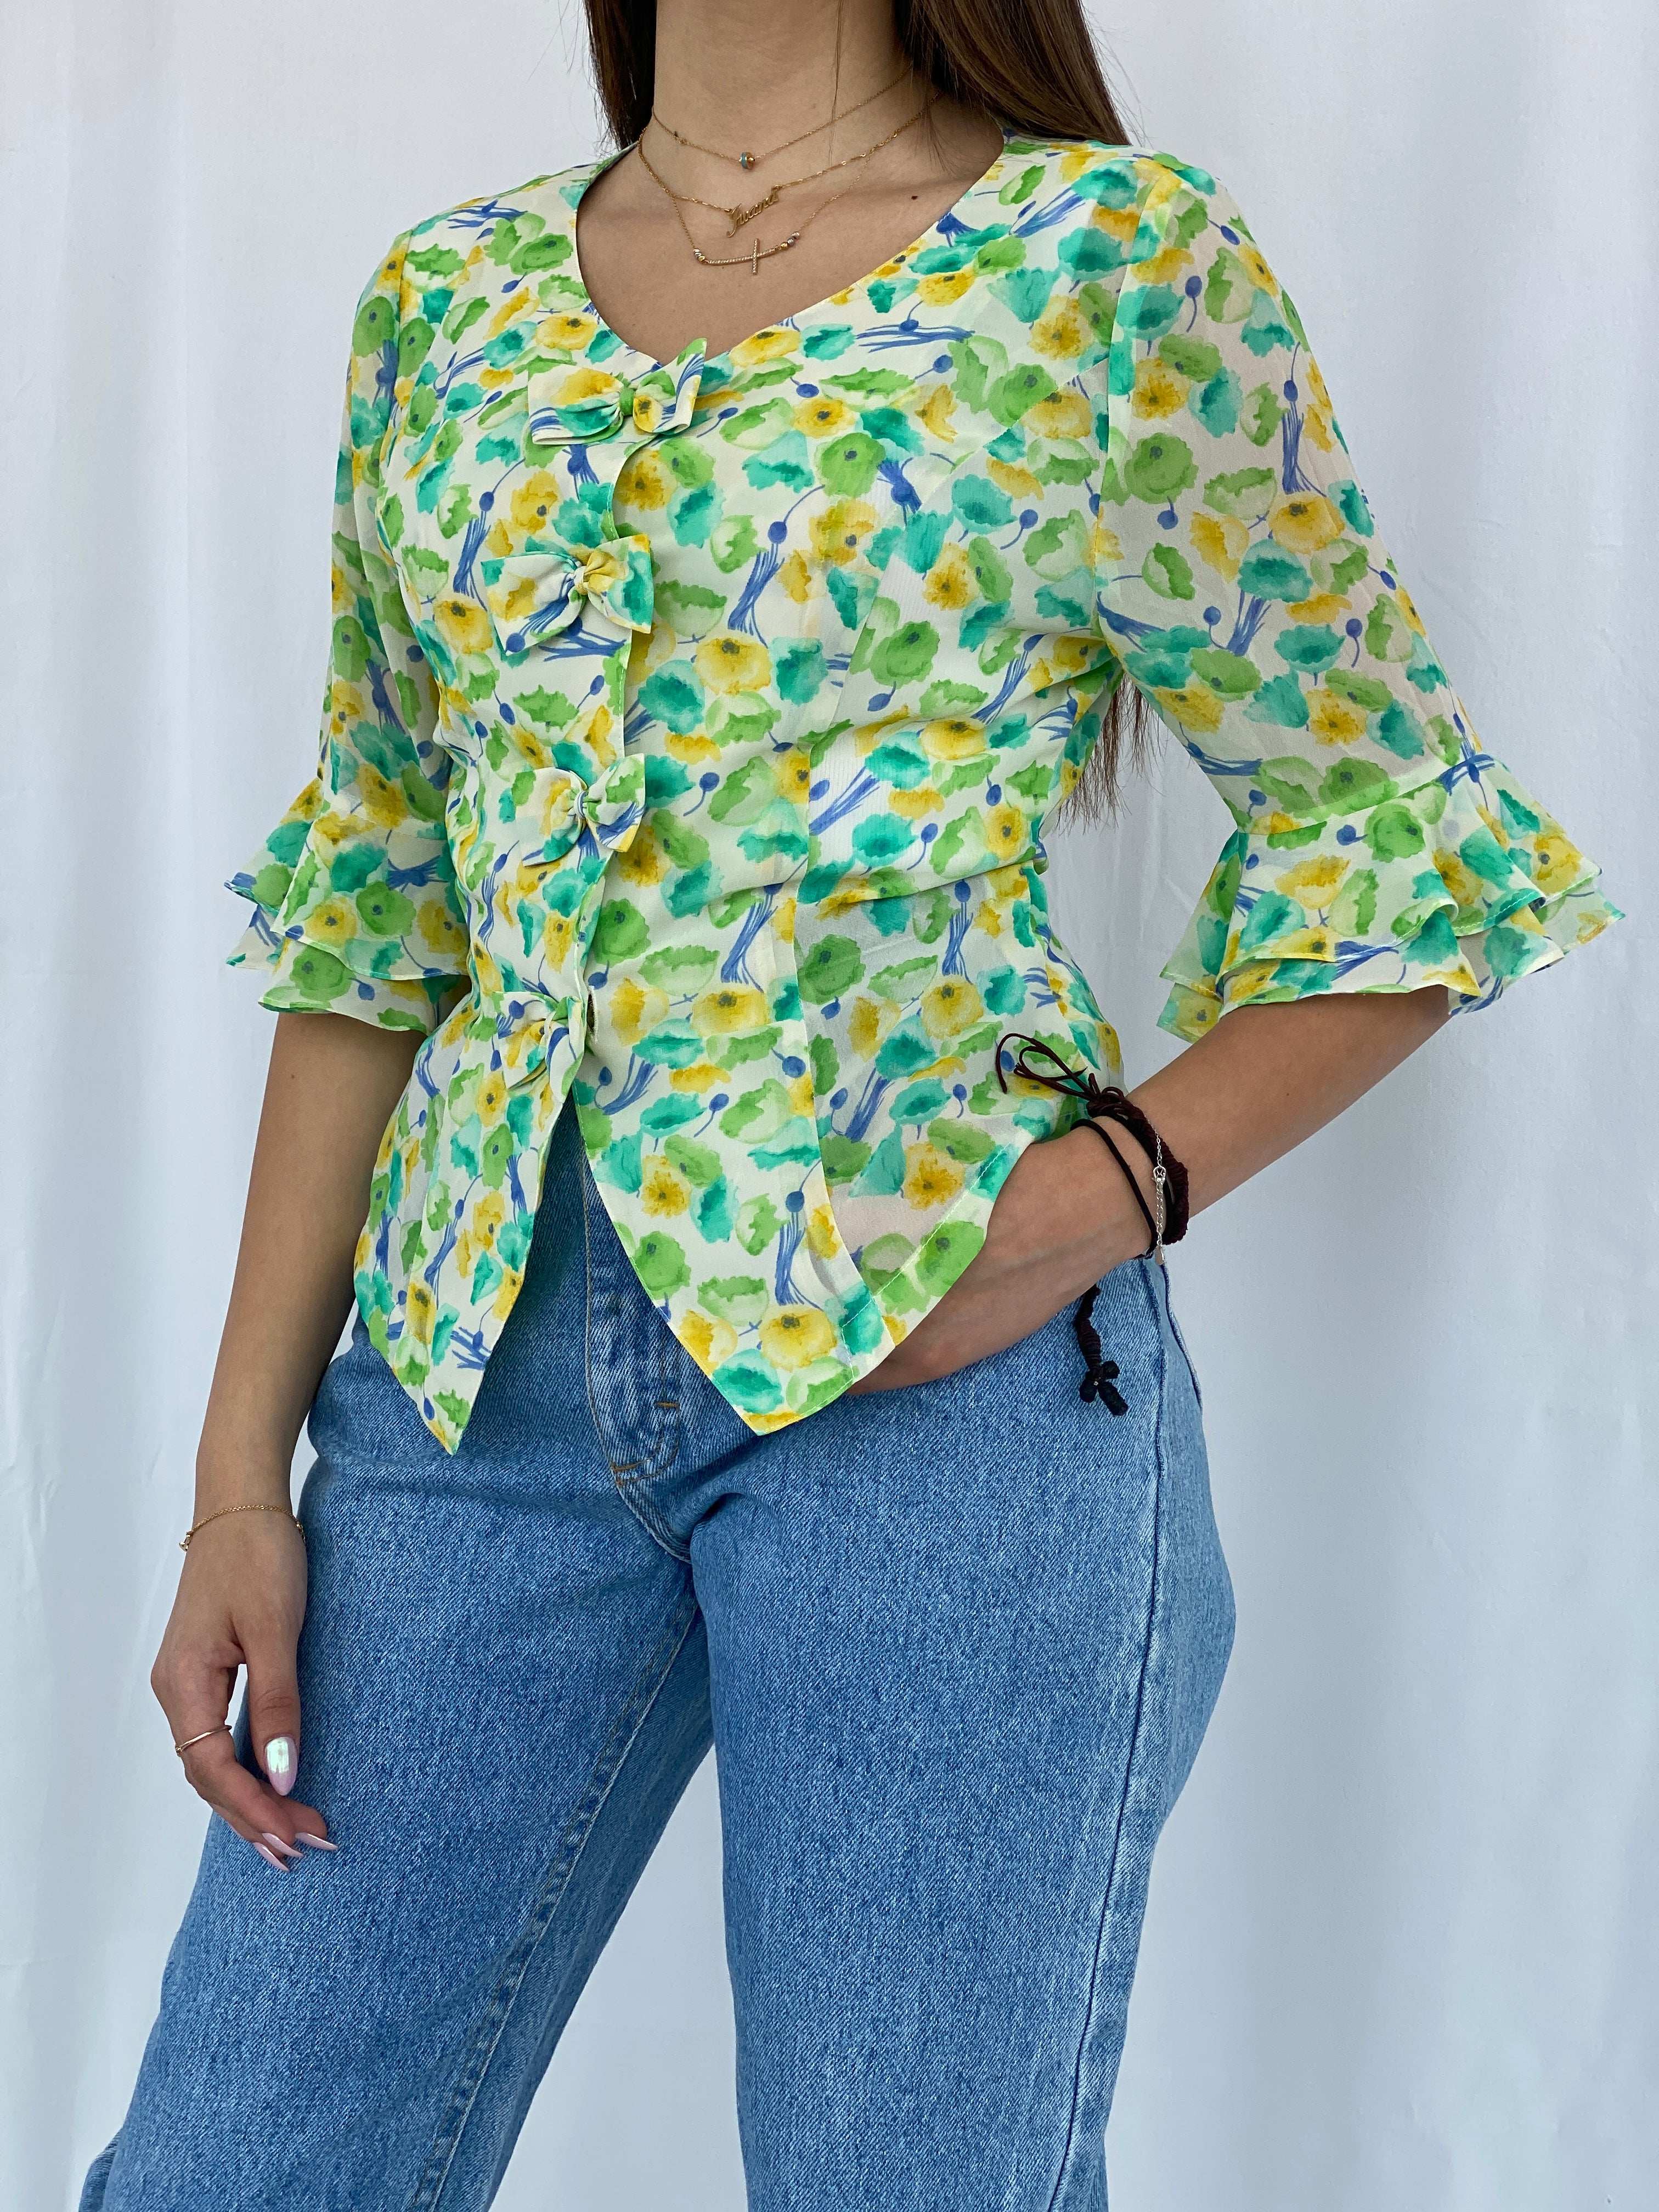 Vintage Floral Green and Yellow Shirt Size S